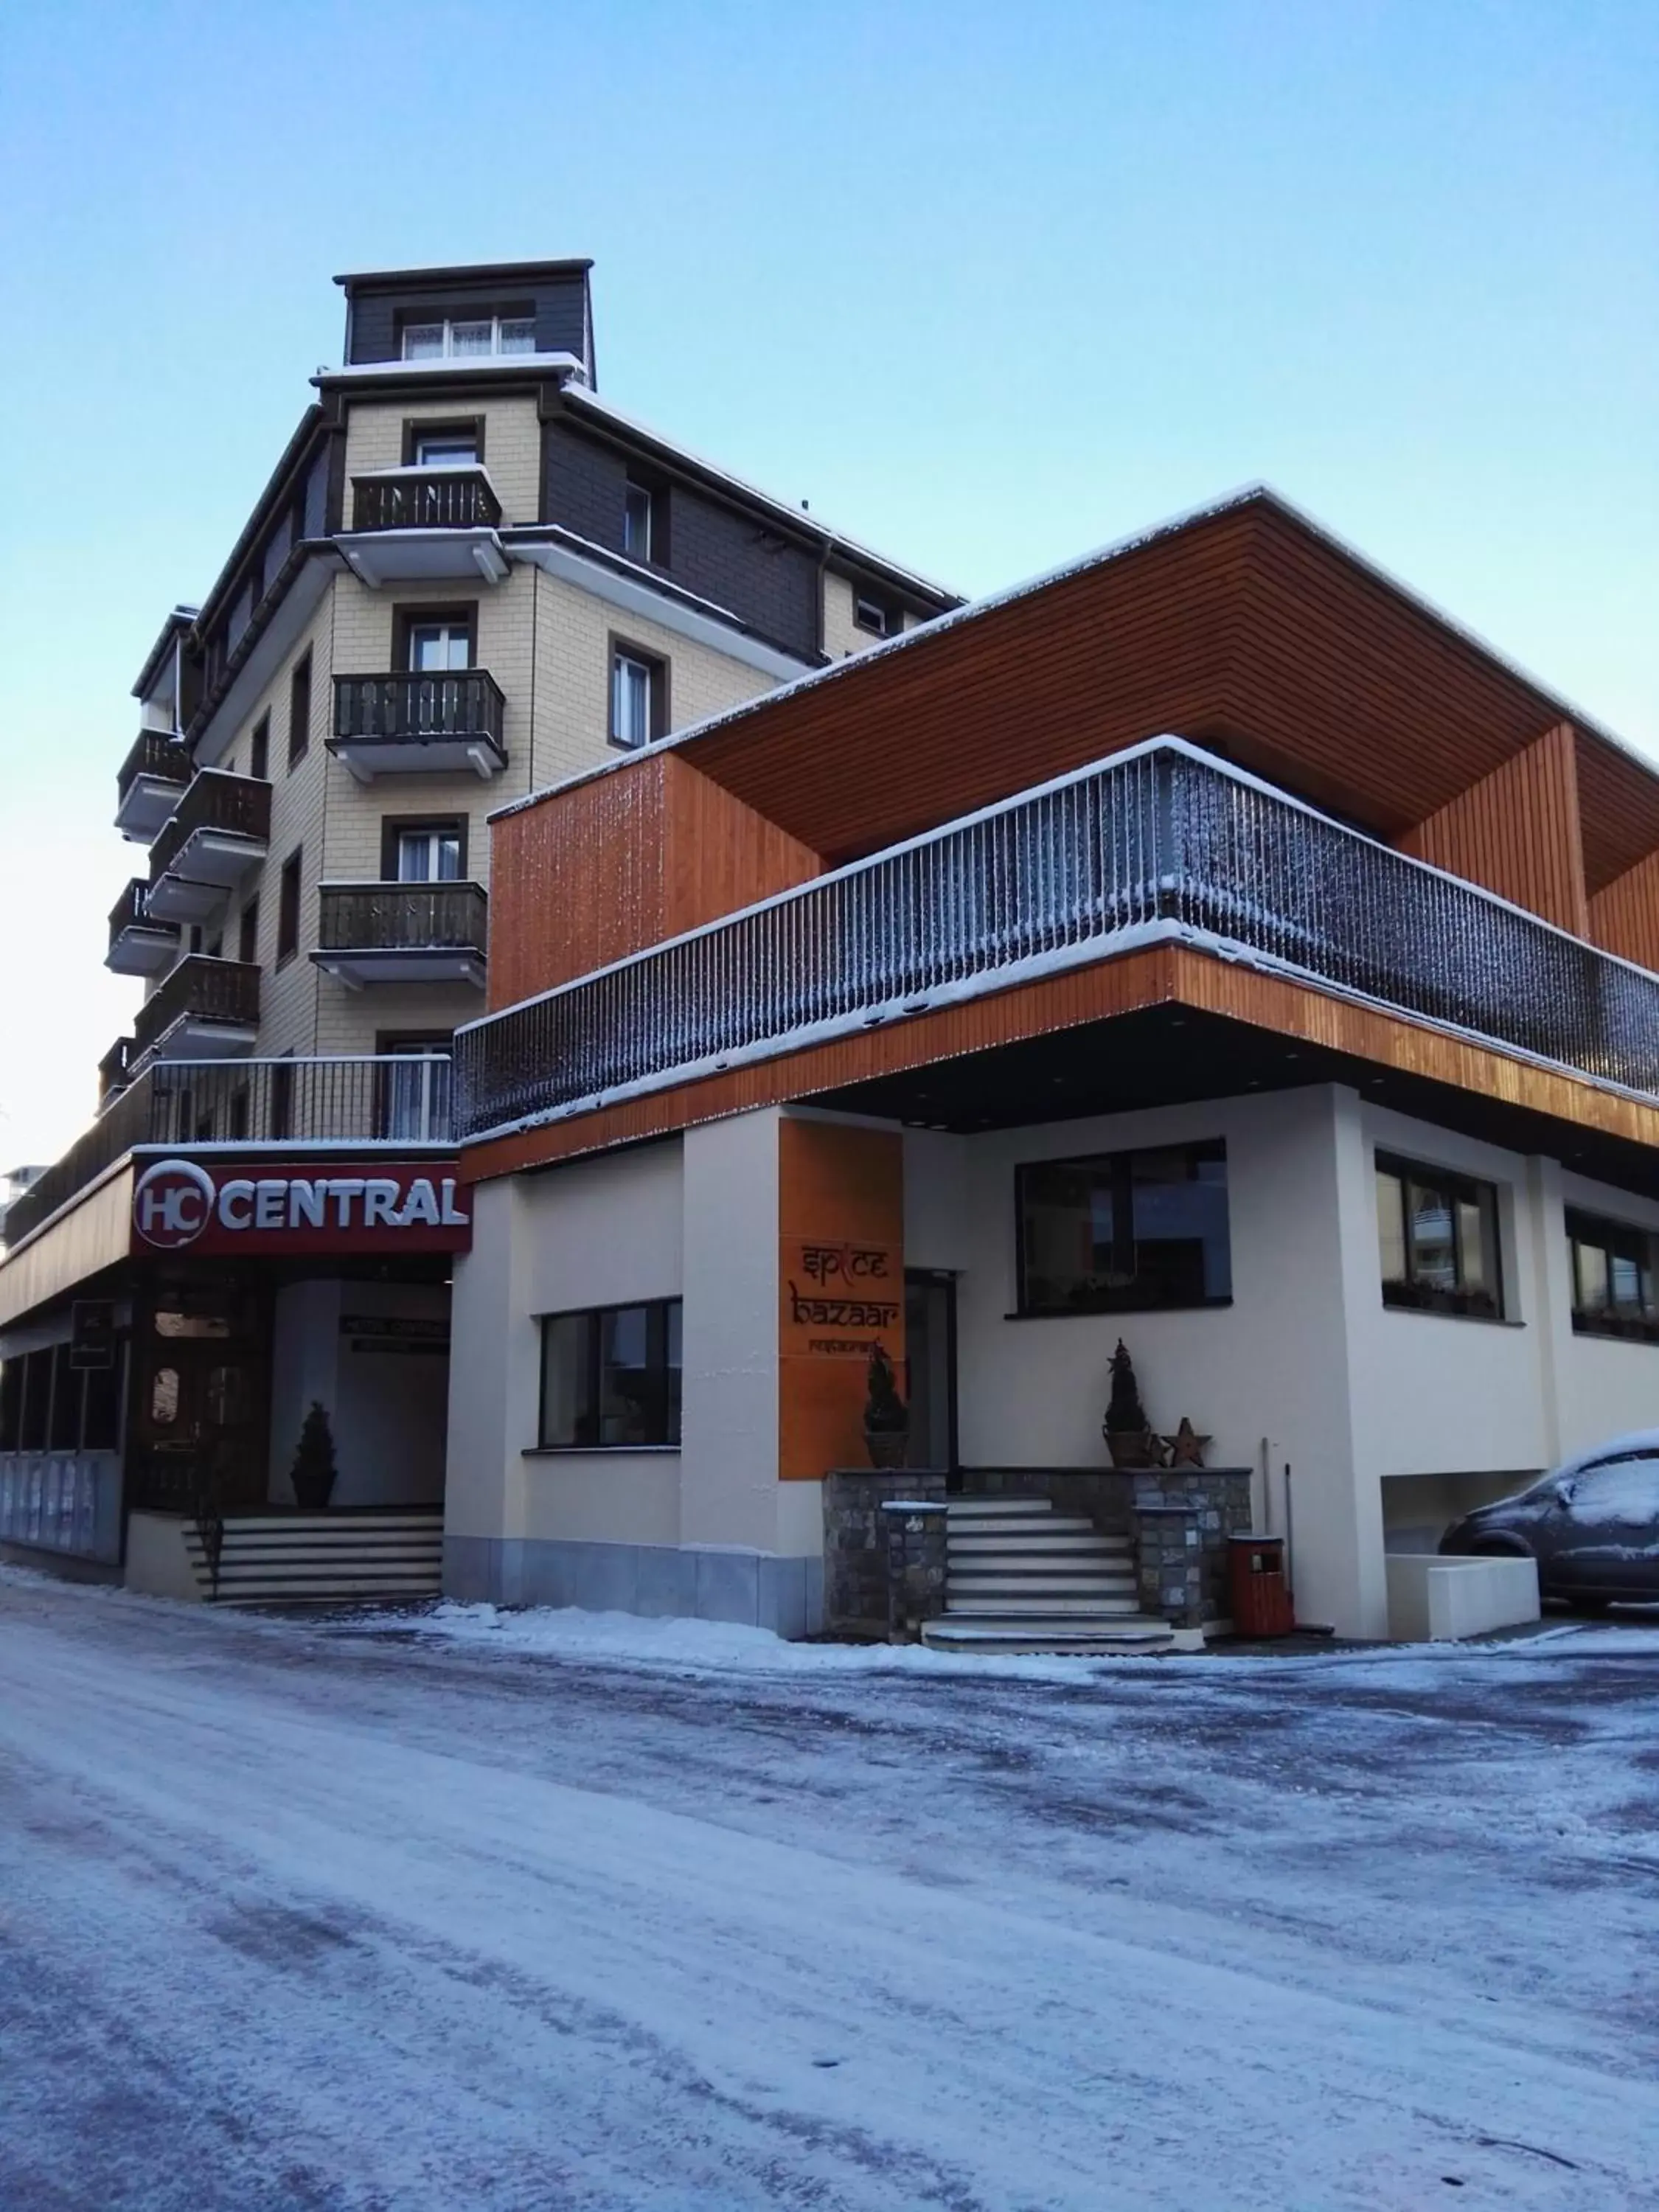 Property building, Winter in Hotel Central